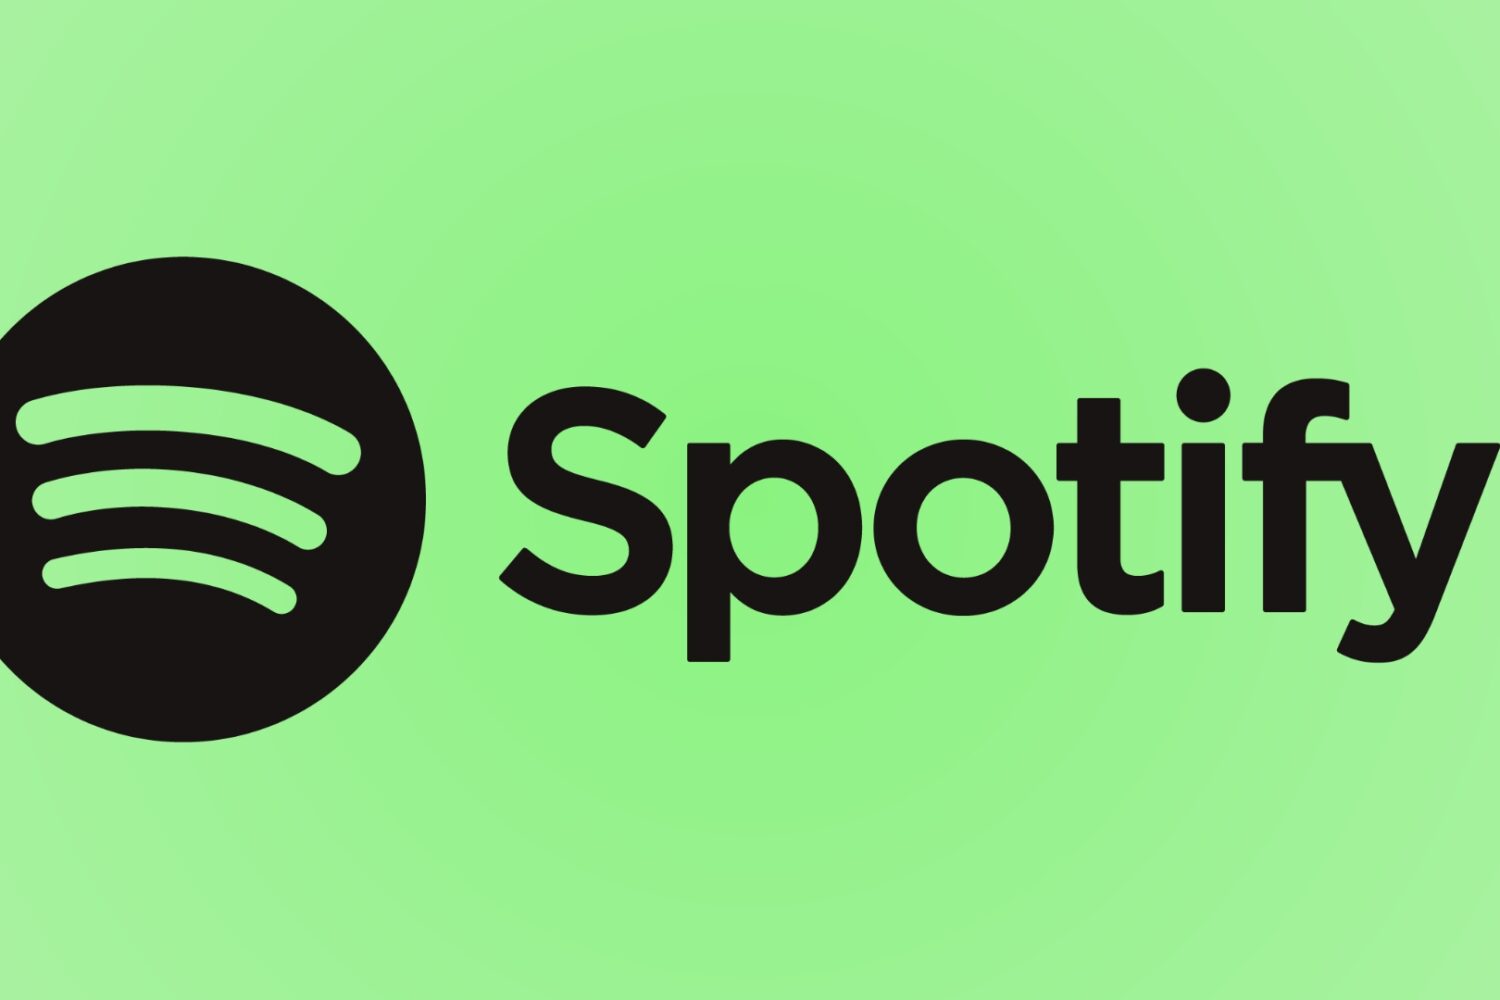 Black Spotify logo and lettering, set against a light green gradient background